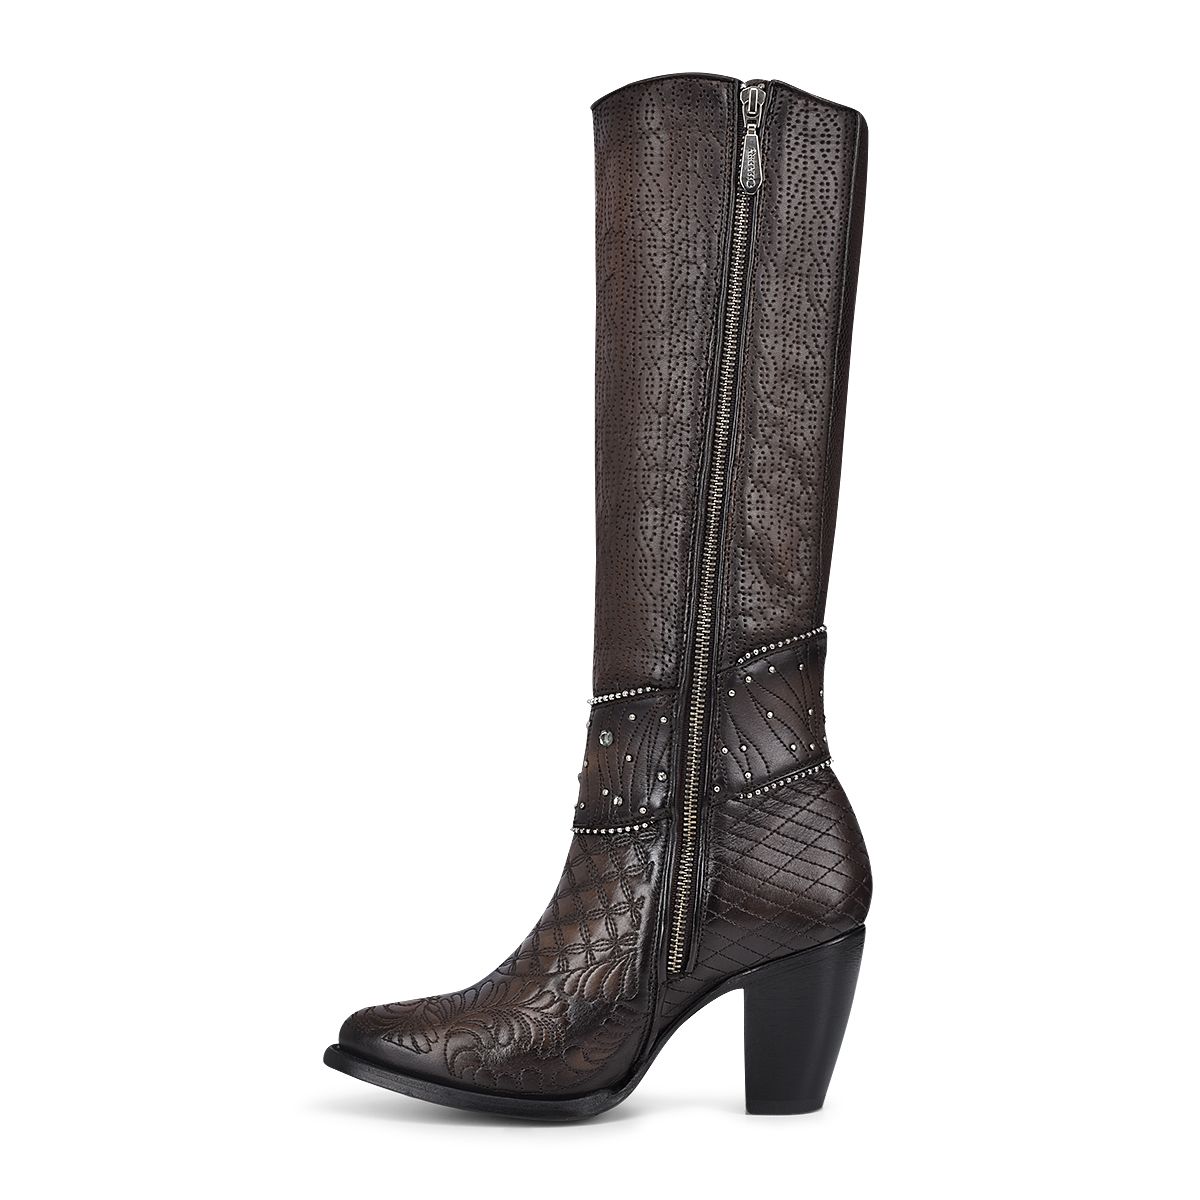 3F80RS - Cuadra black and brown Paris Texas fashion boots for women-Kuet.us